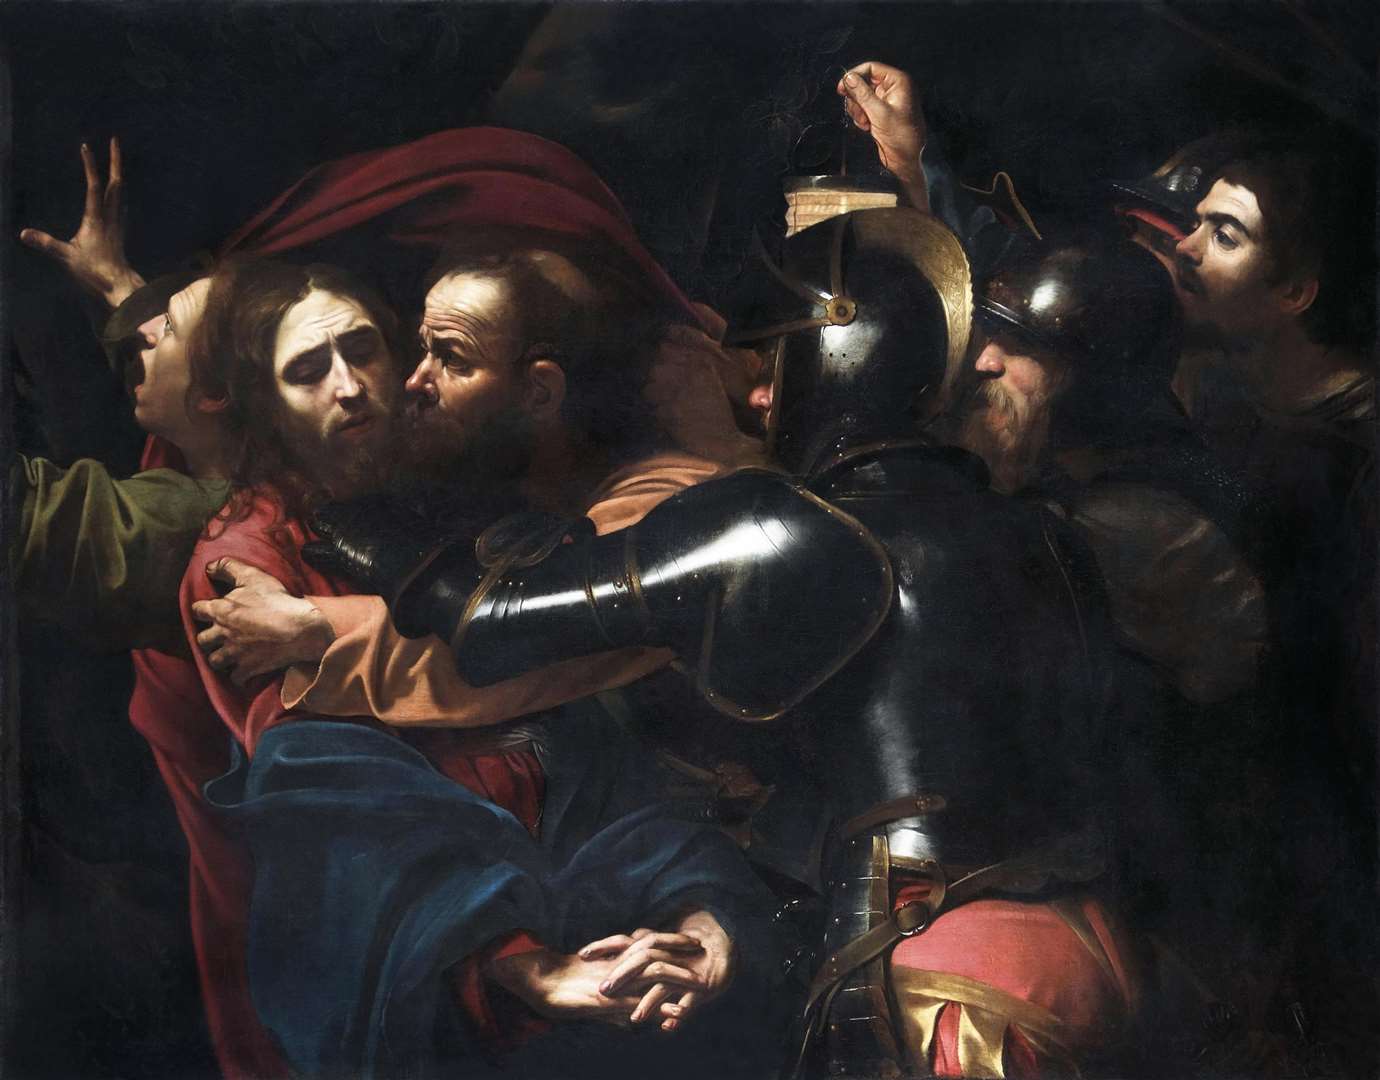 Caravaggio (Michelangelo Merisi da) (1571–1610), The Taking of Christ, 1602 – on indefinite loan to the National Gallery of Ireland from the Jesuit Community, Leeson St, Dublin, who acknowledge the kind generosity of the late Dr Marie Lea-Wilson, 1992 (National Gallery of Ireland)